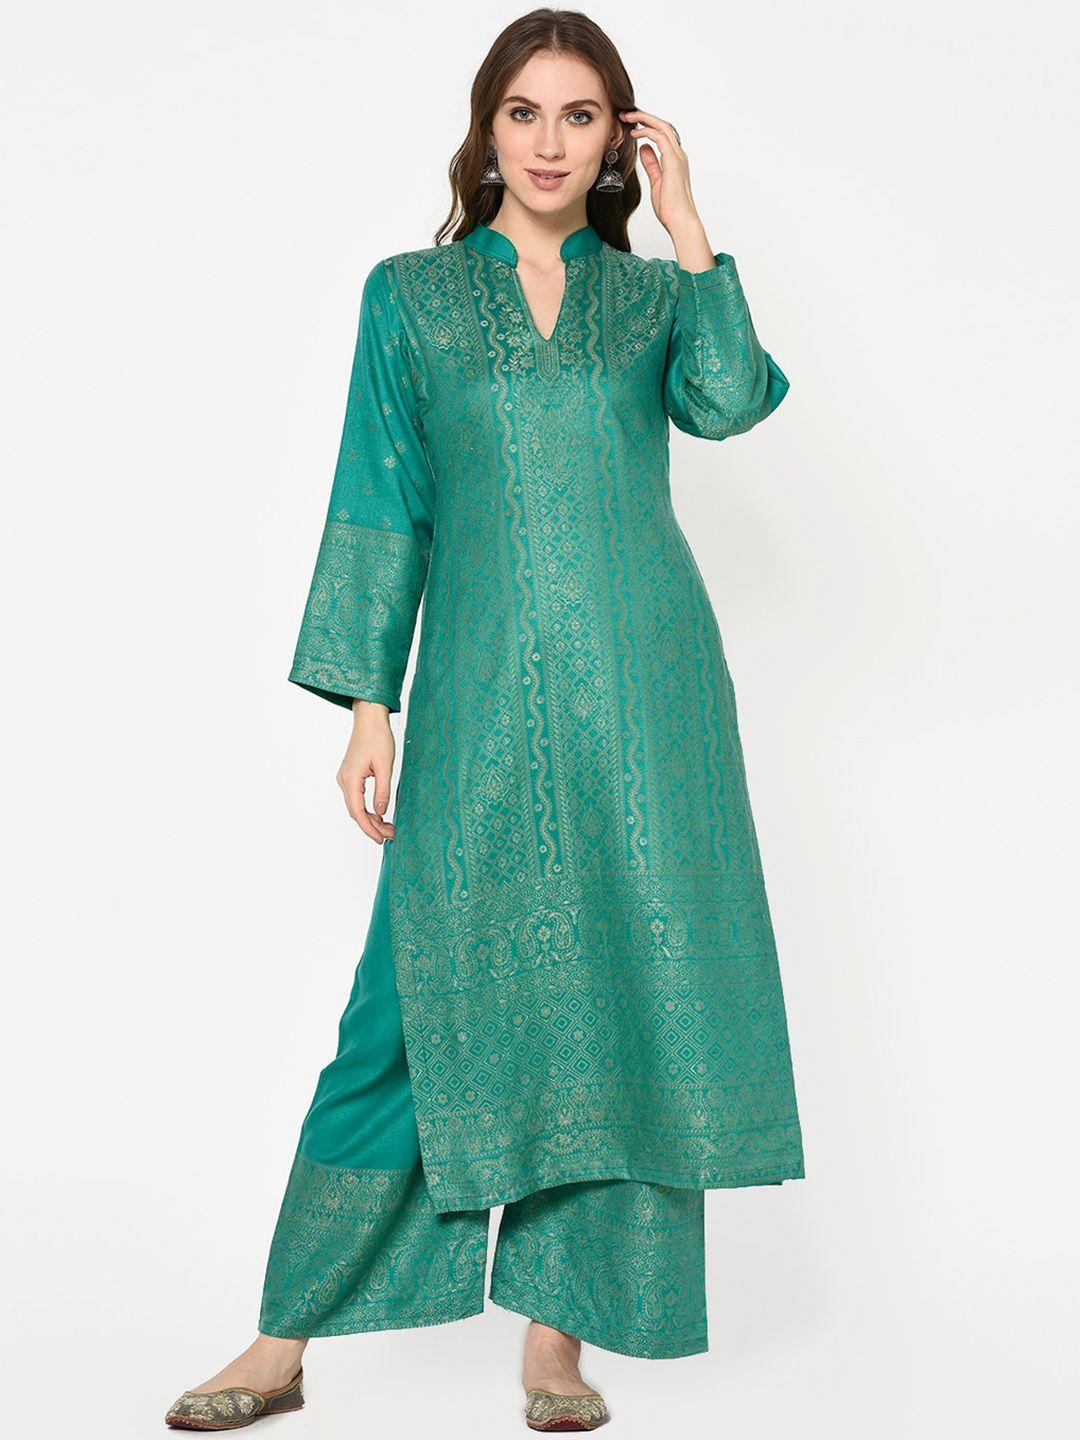 safaa-women-sea-green-viscose-acrylic-woven-design-suit-unstitched-dress-material-for-winter